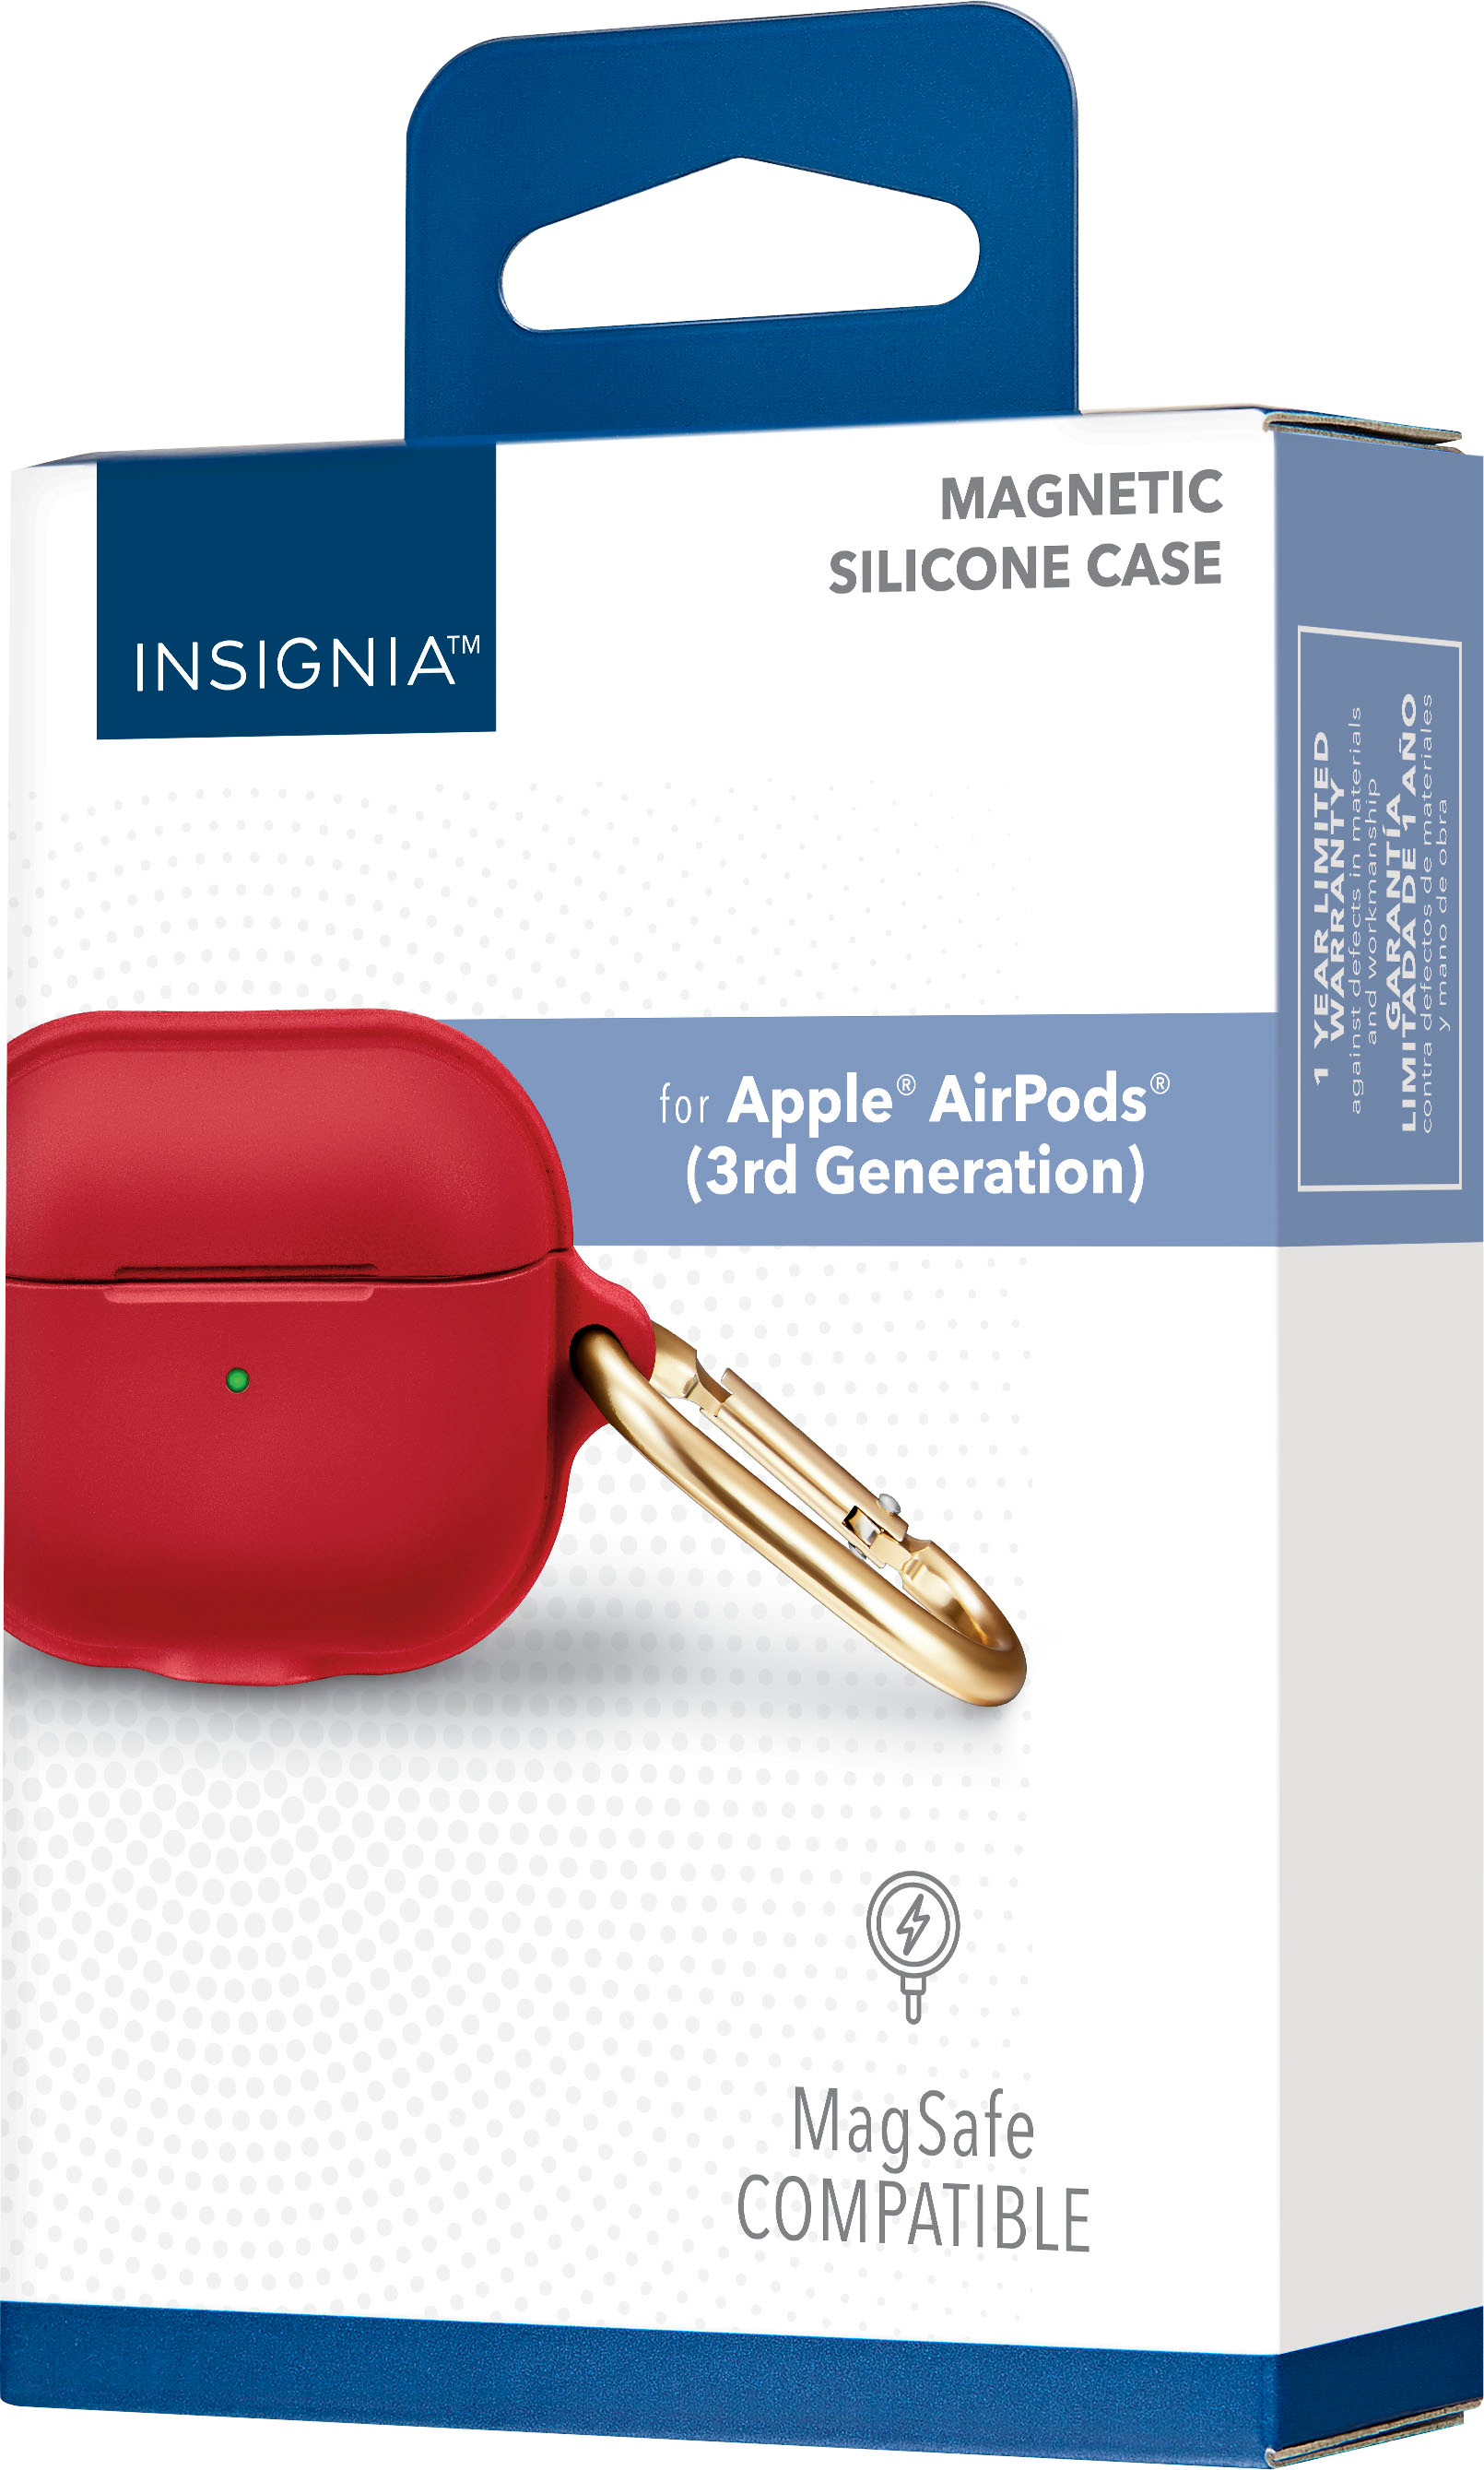 Lids Stanford Cardinal Silicone AirPods Case - Crimson